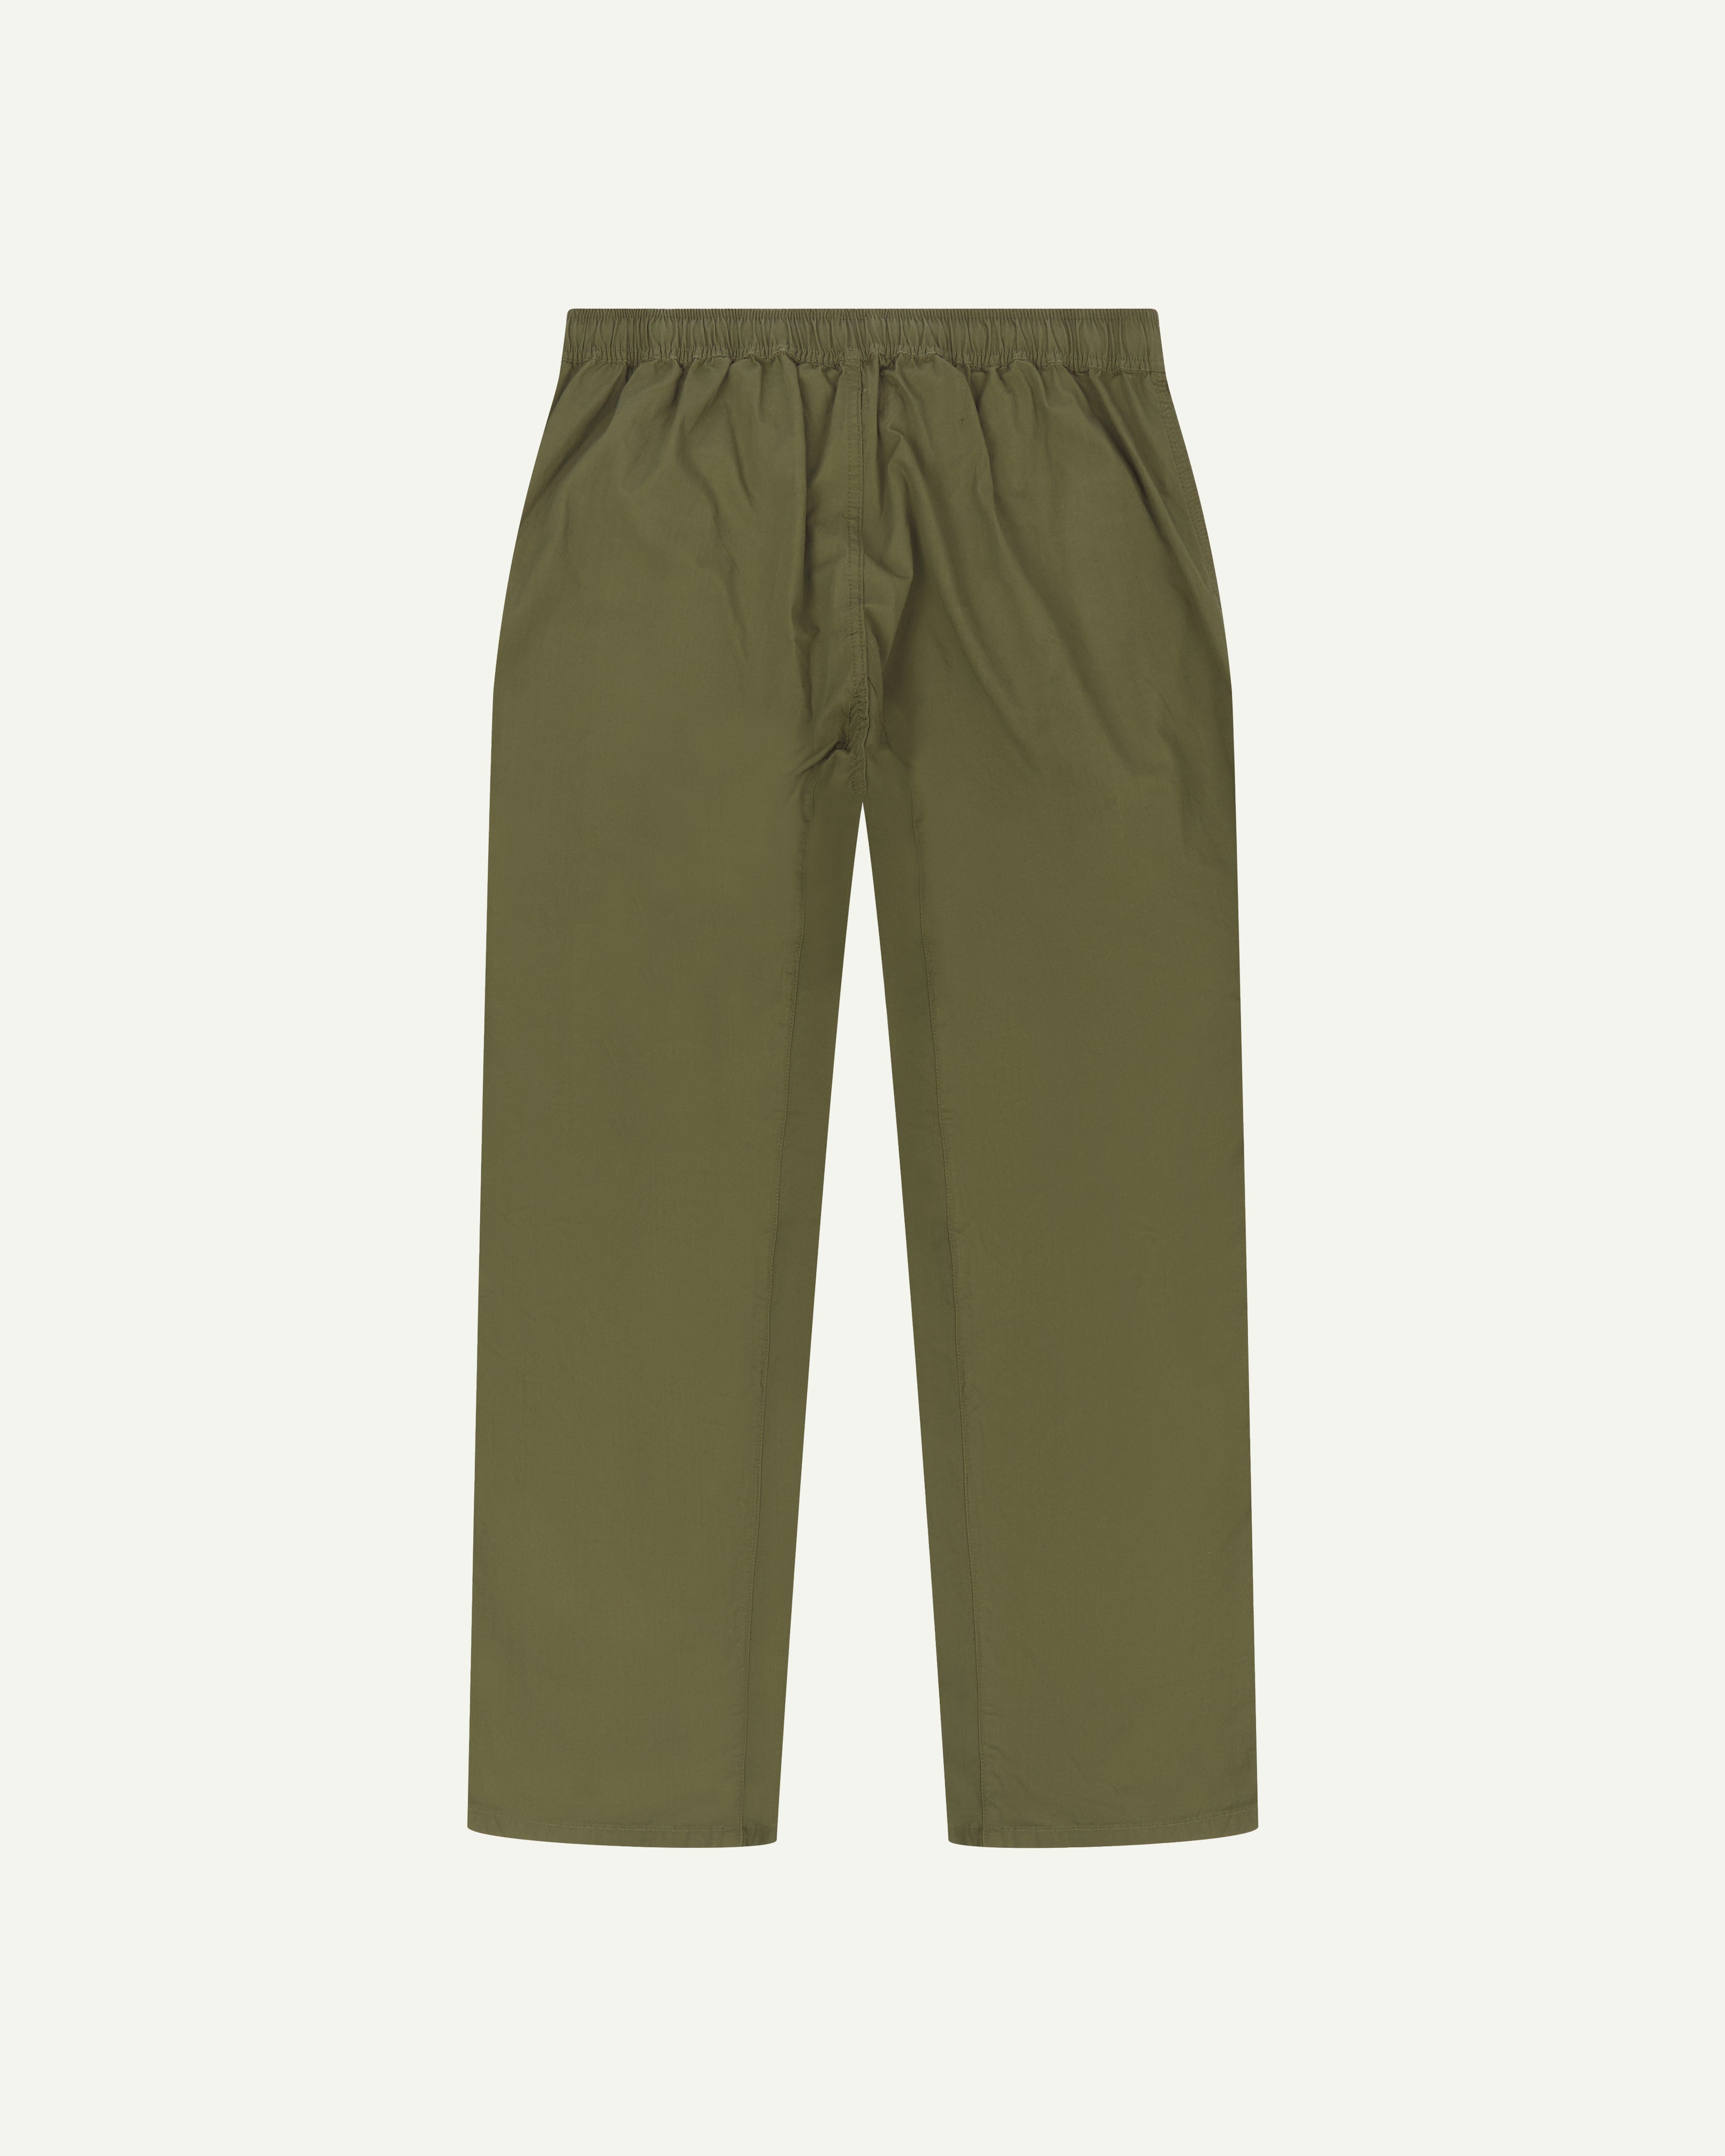 Flat back shot of the Uskees 5020 lightweight utility pants in olive showing drawstring waist